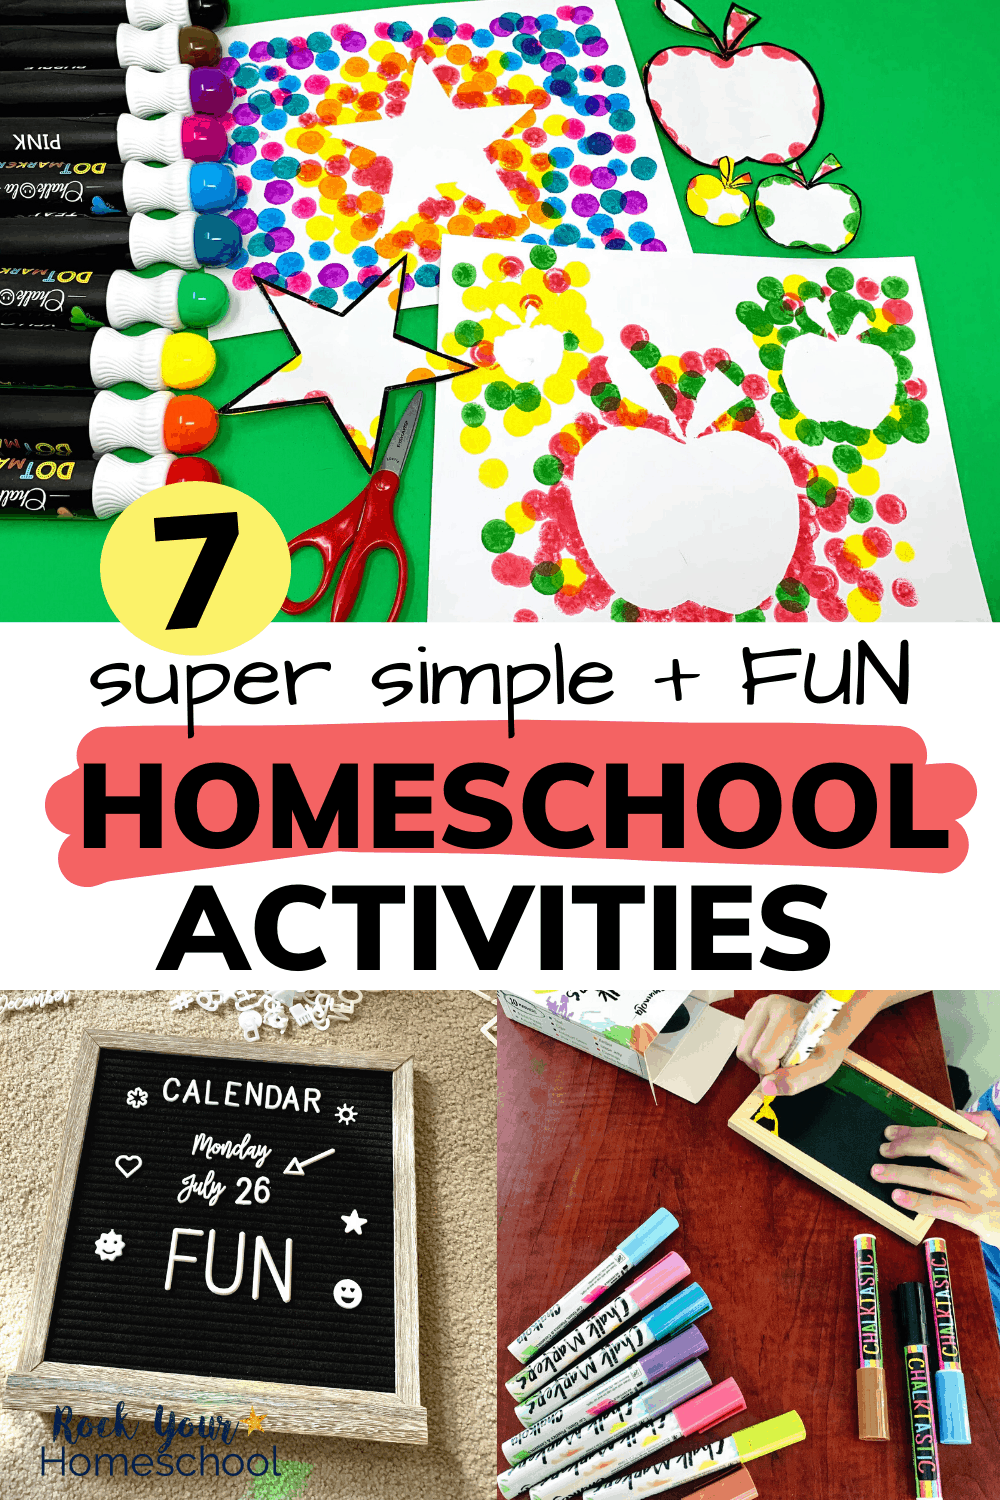 7 Fun Homeschool Activities You Can Enjoy with These Super Cool Art Supplies